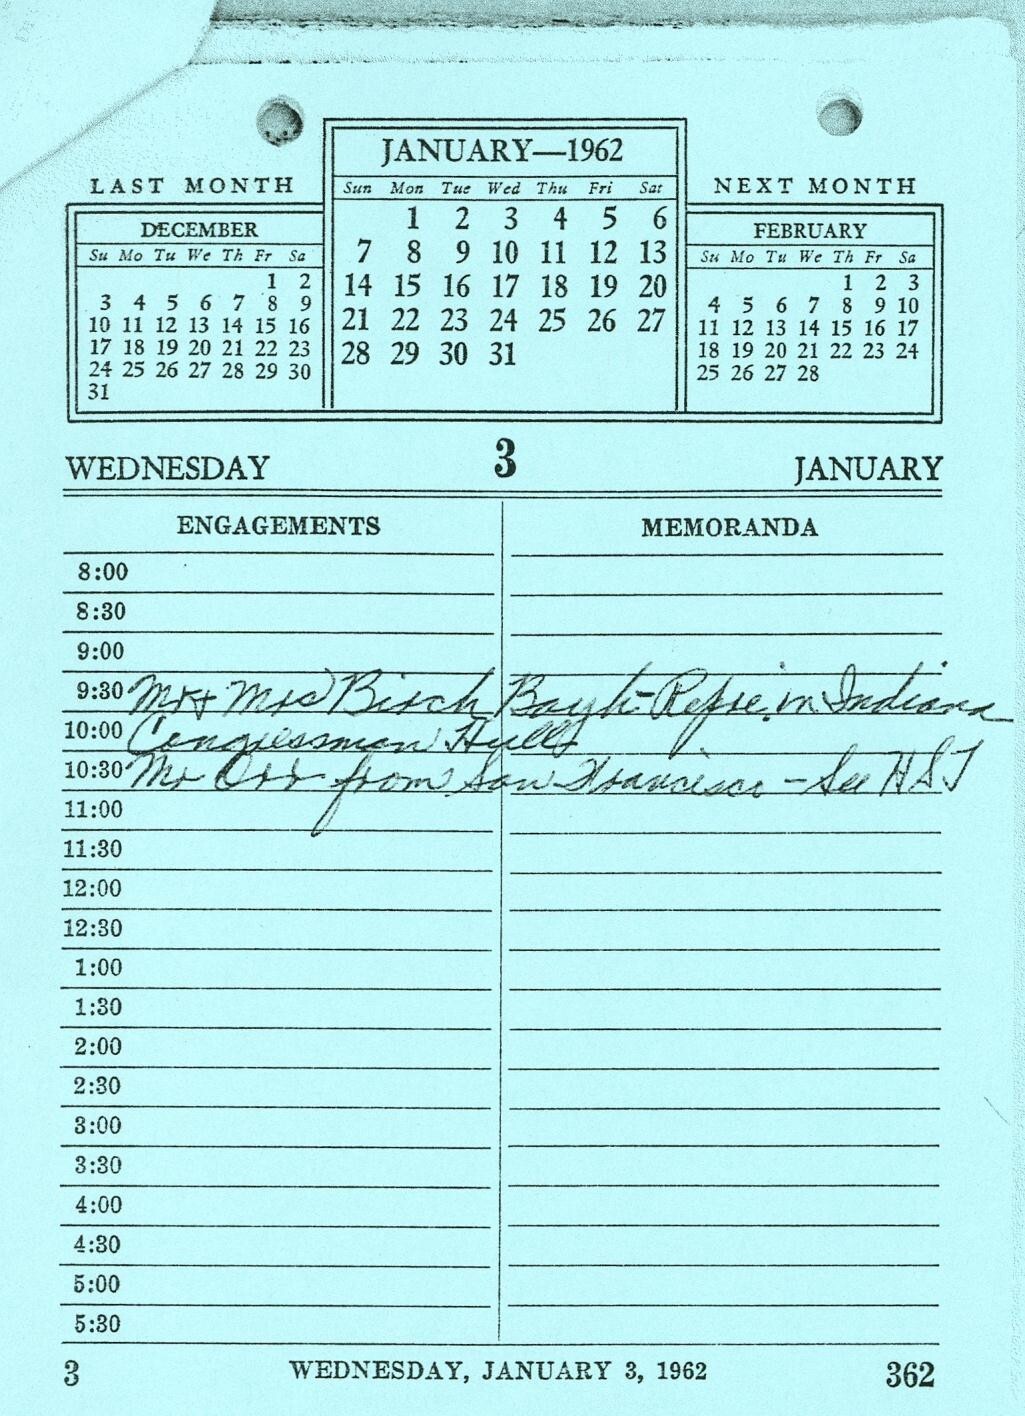 File:Daily Appointment Sheet for President Harry S. Truman - DPLA